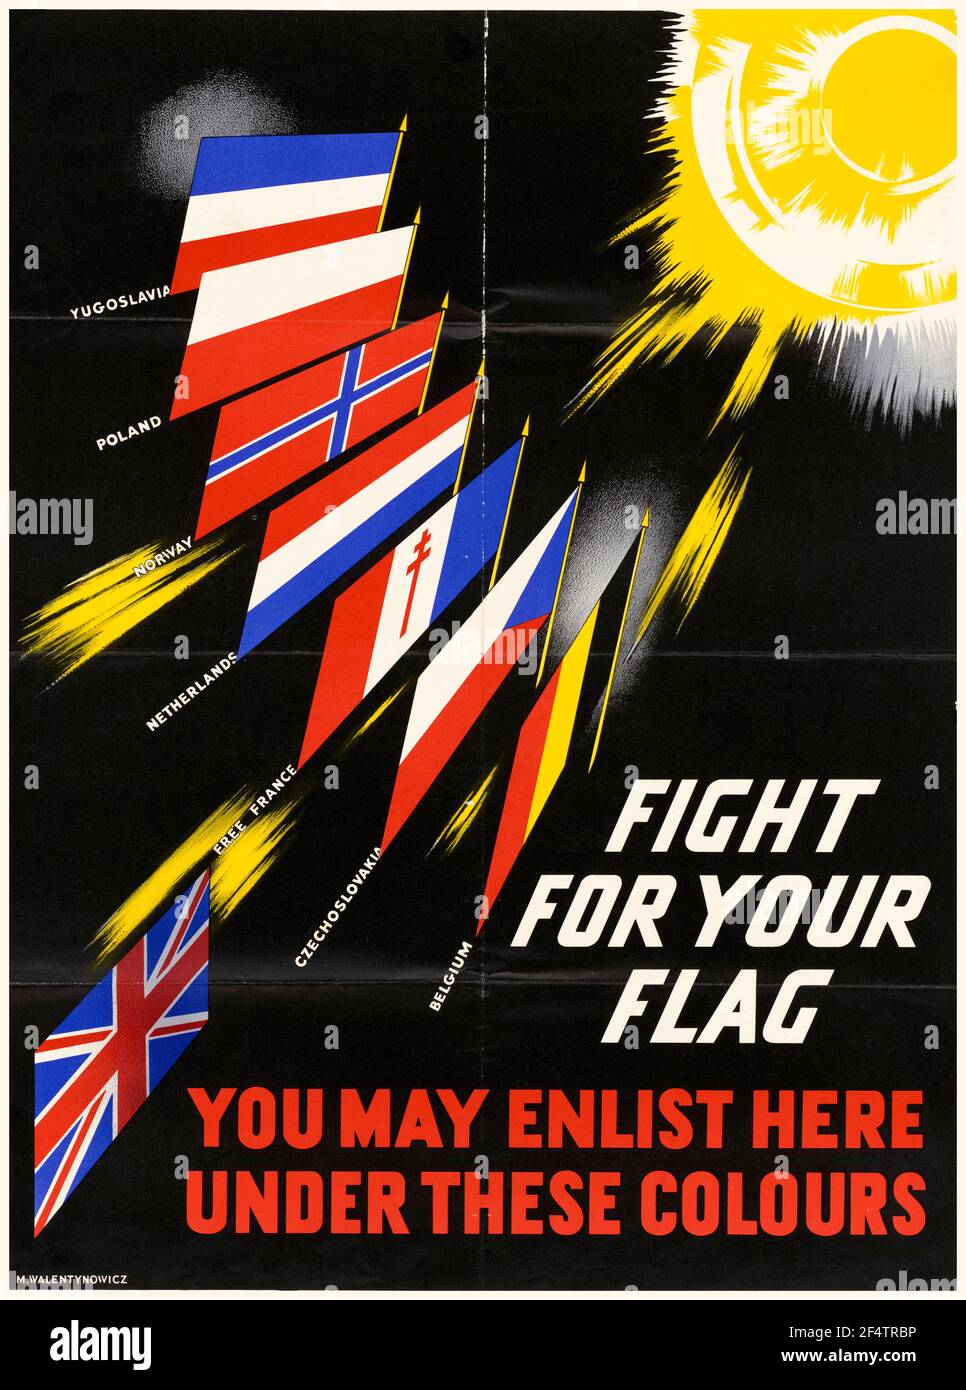 Britisch, WW2 Forces Recruitment Poster, Citizens of Occupied Europe: Fight for Your Flag, 1942-1945 Stockfoto